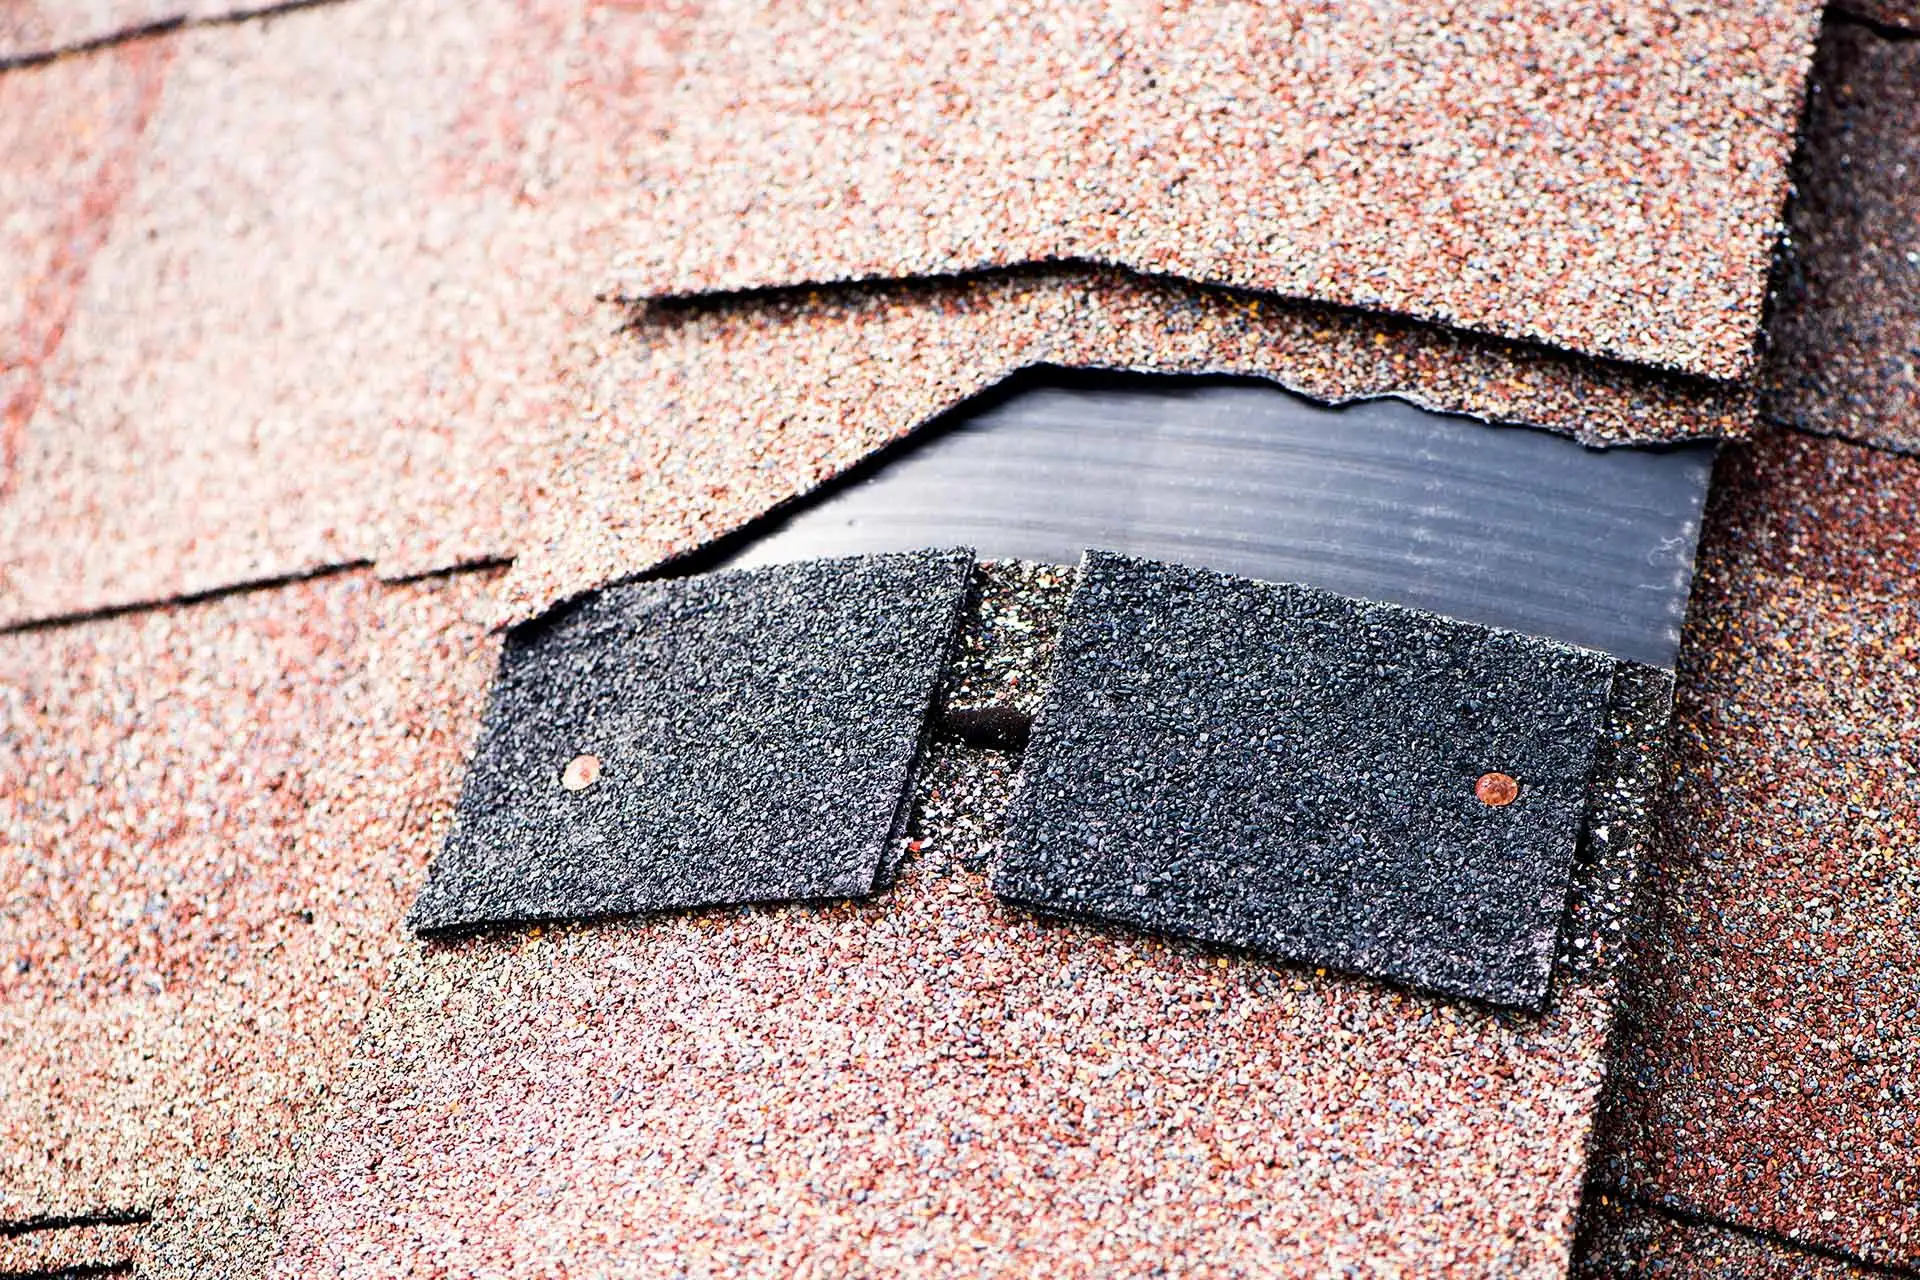 Damaged roof shingles on a home in Lakeland, FL.